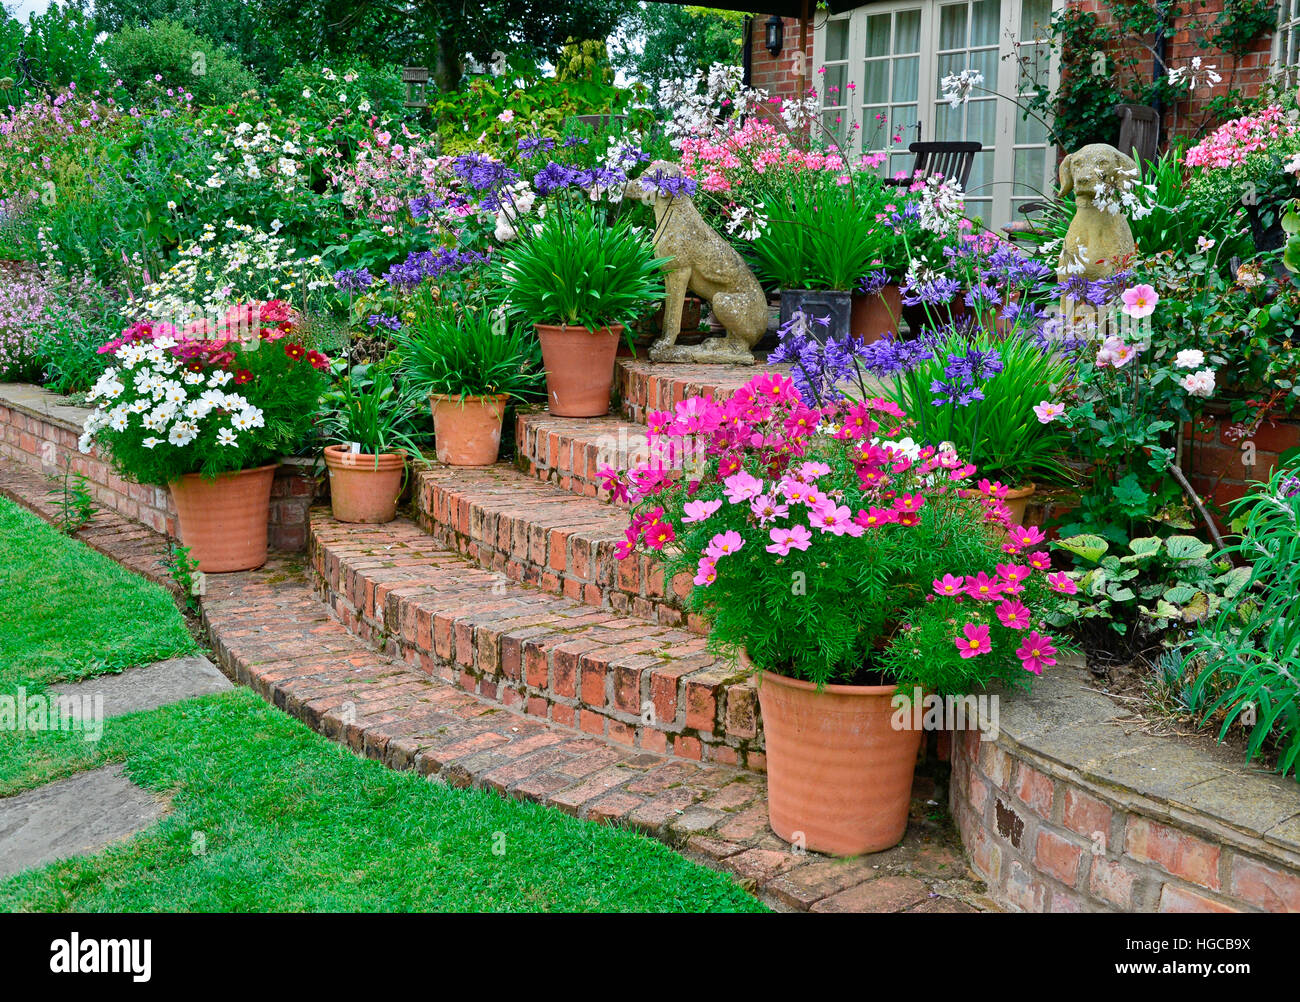 Colourful garden terrace with mixed flower beds and planted containers making a very attractice display in front of a country house Stock Photo